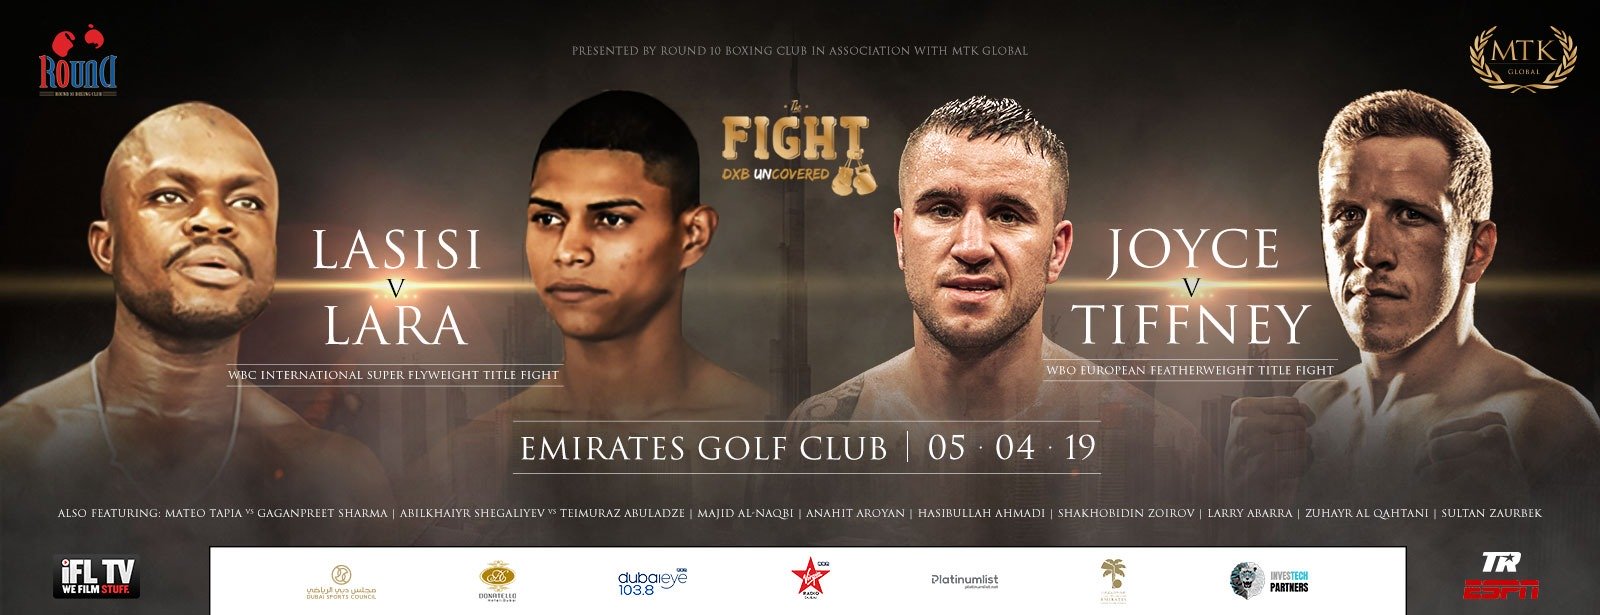 The Fight DXB Uncovered - Coming Soon in UAE